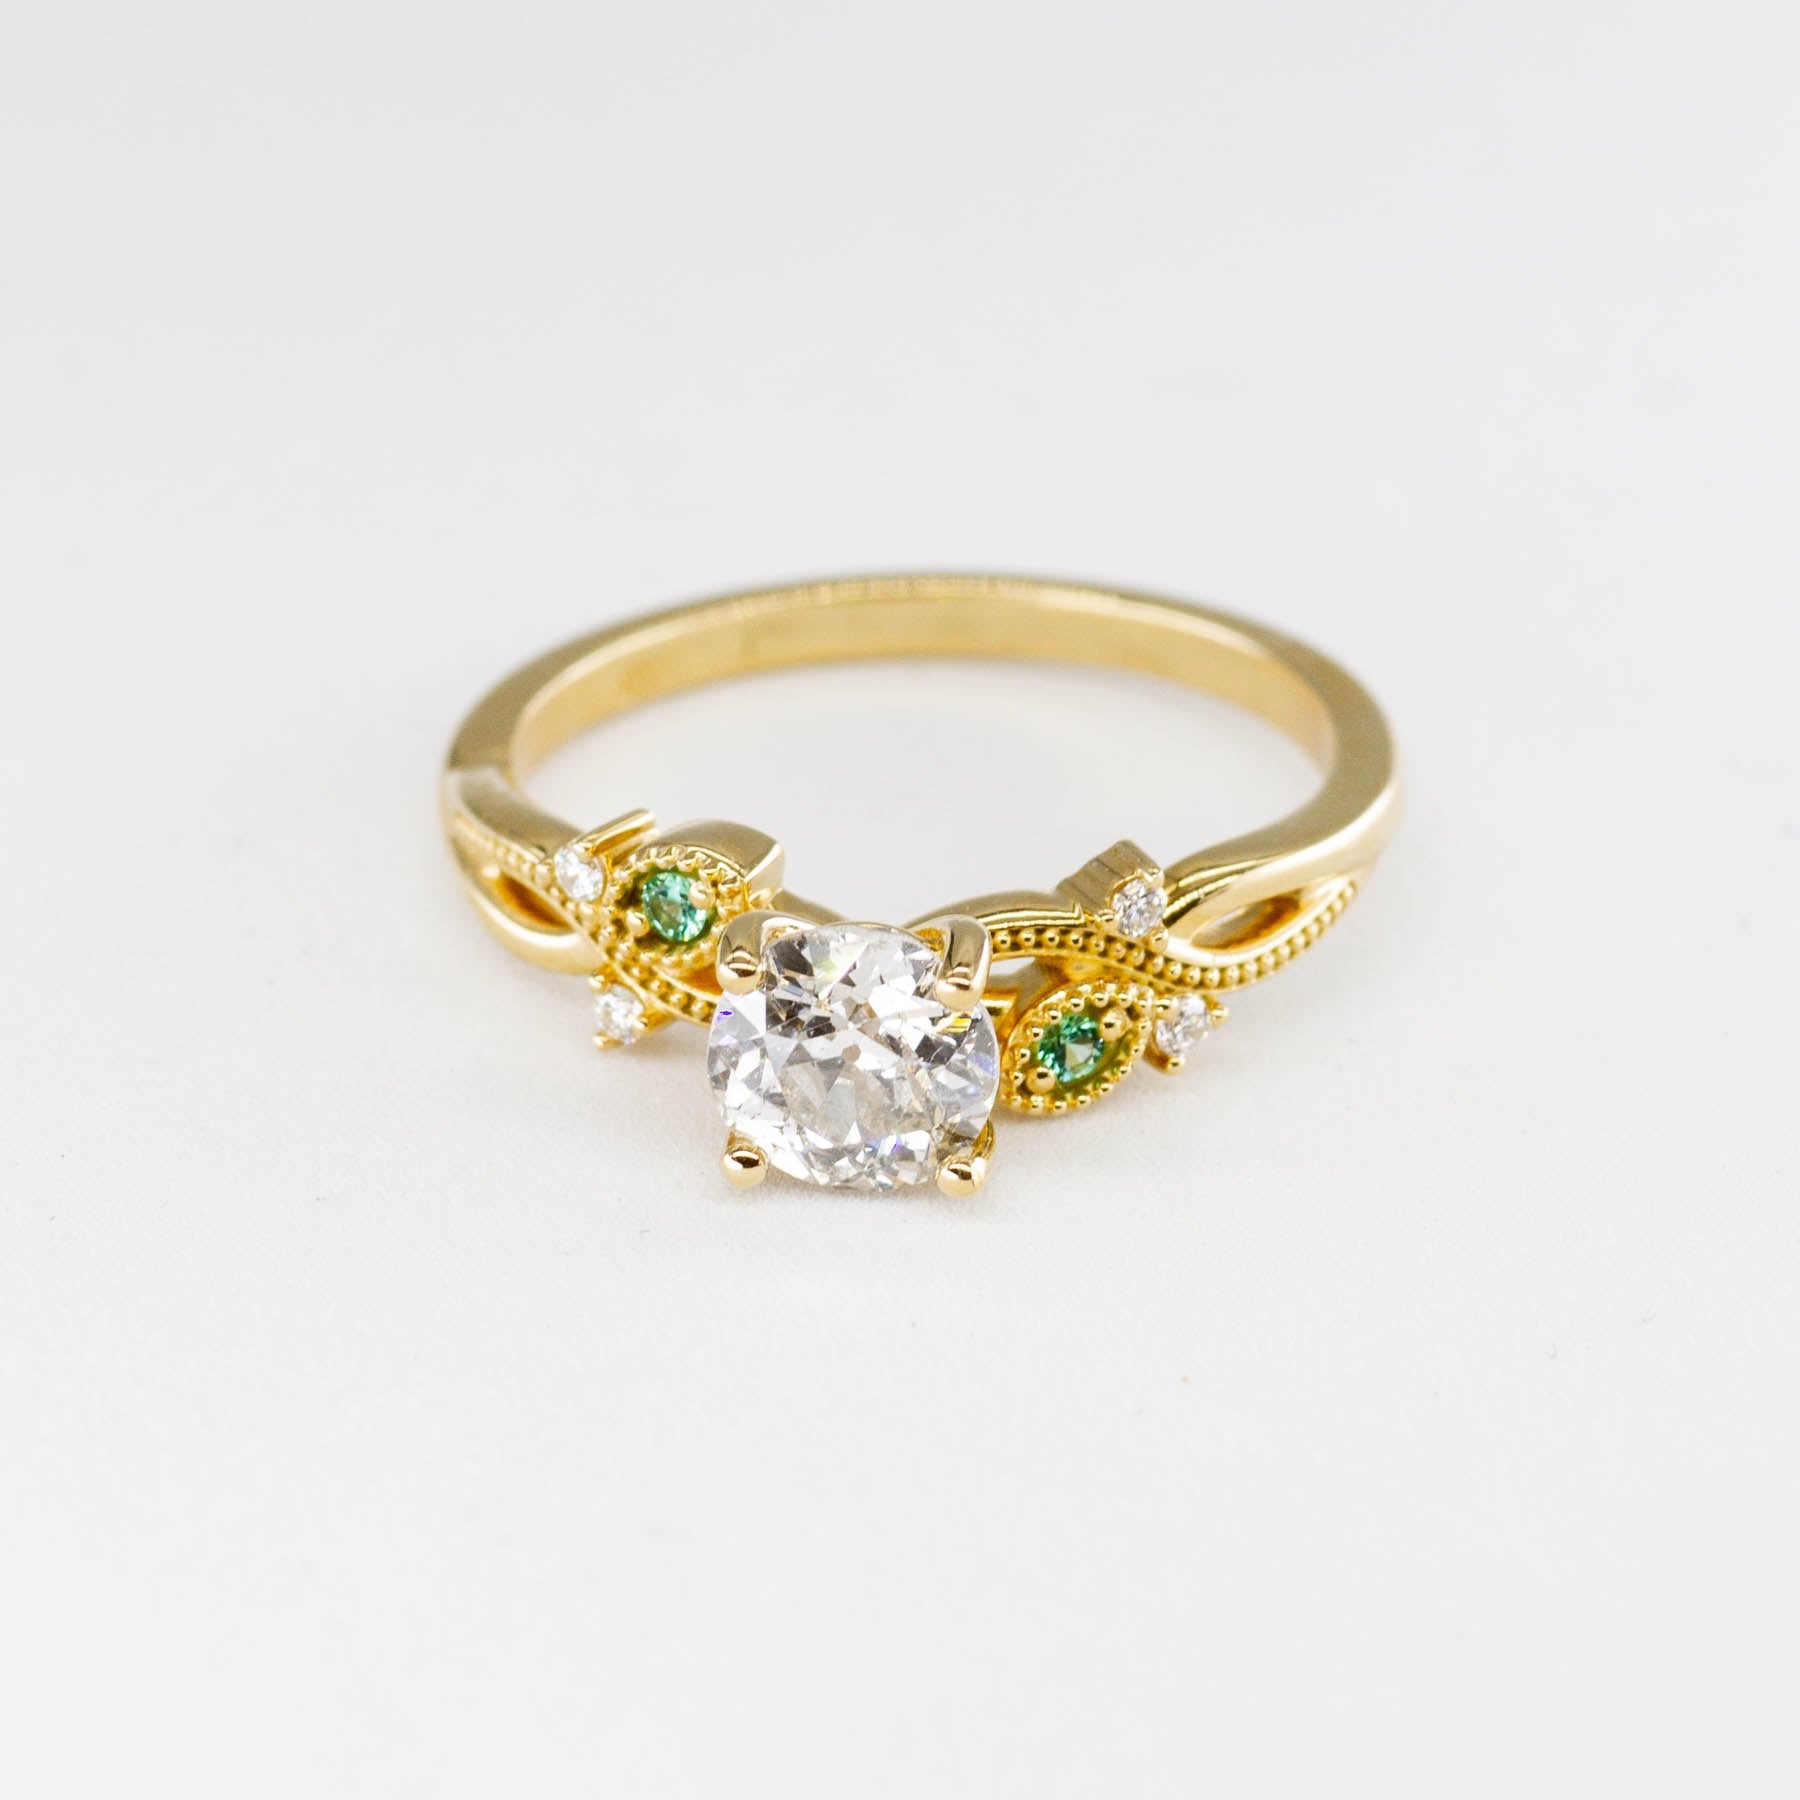 '100 Ways' Old European Cut Diamond Engagement Ring with Diamond and Emerald Accents | 0.92ctw, 0.04ctw | SZ 7.25 | - 100 Ways